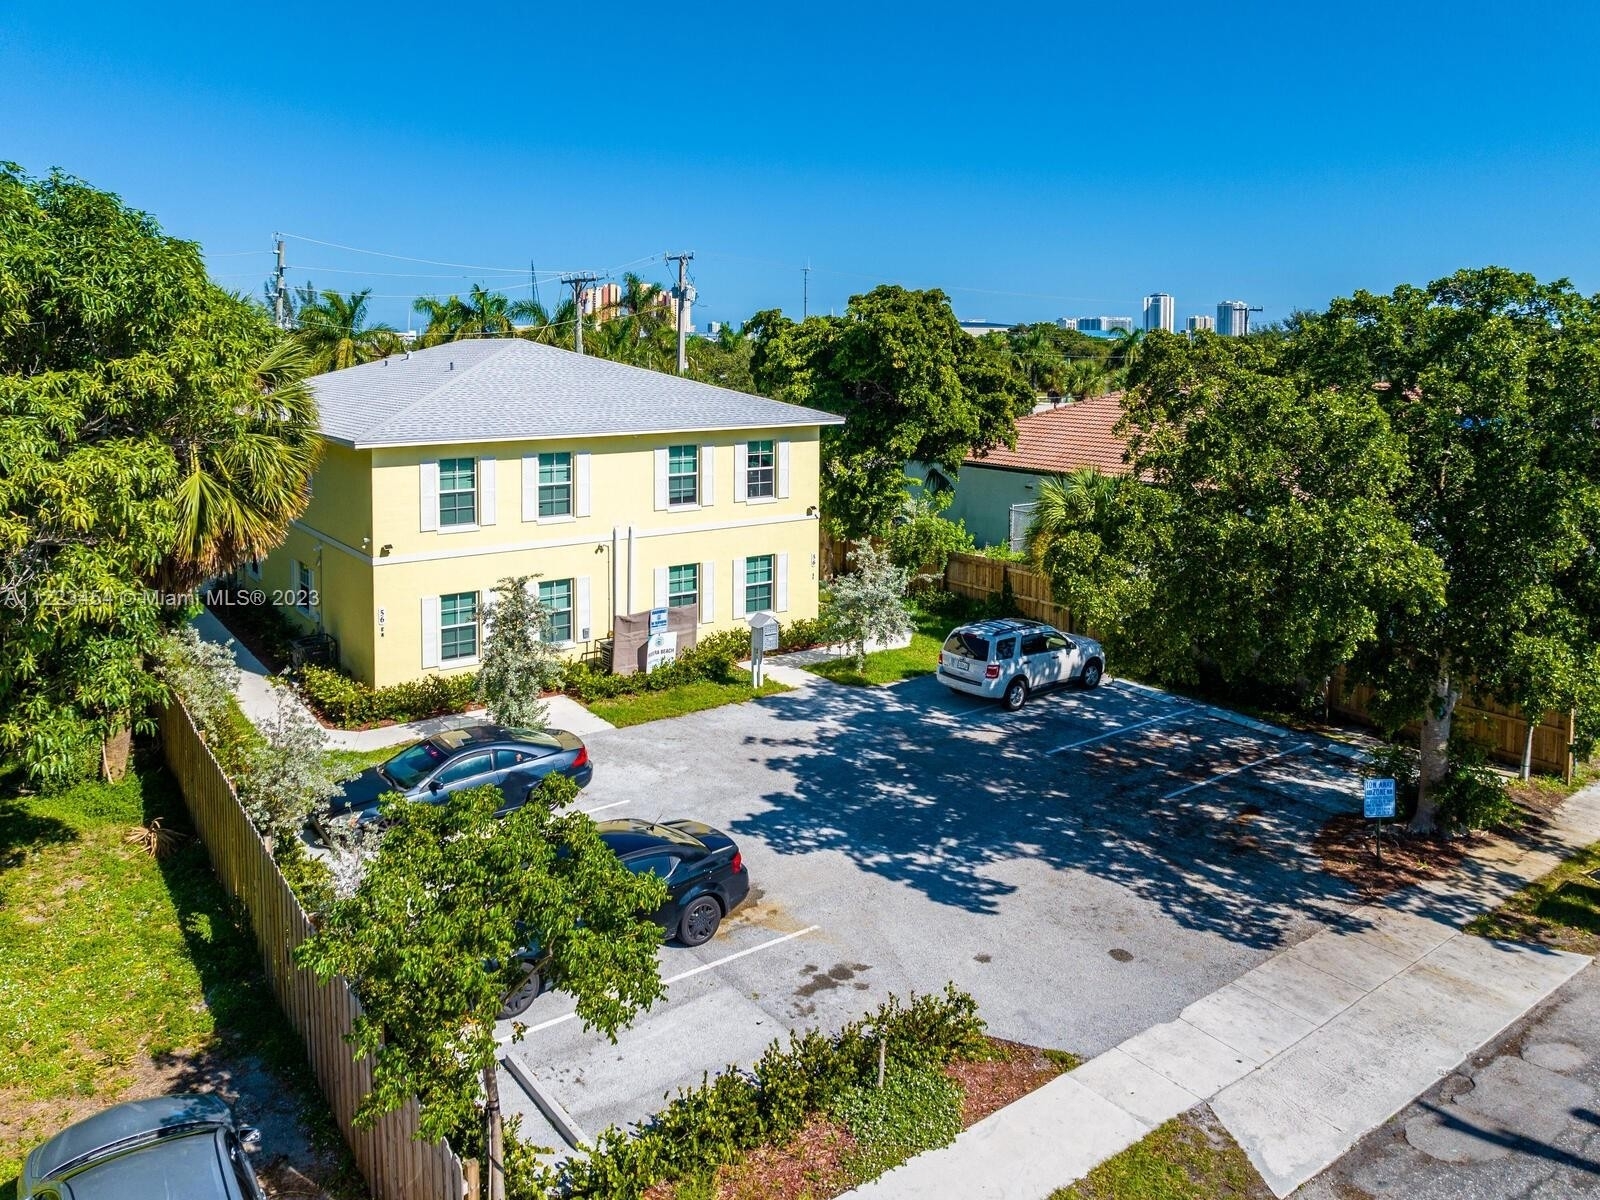 Multi Family Townhouse for Sale at 13th Street, Riviera Beach, FL 33404